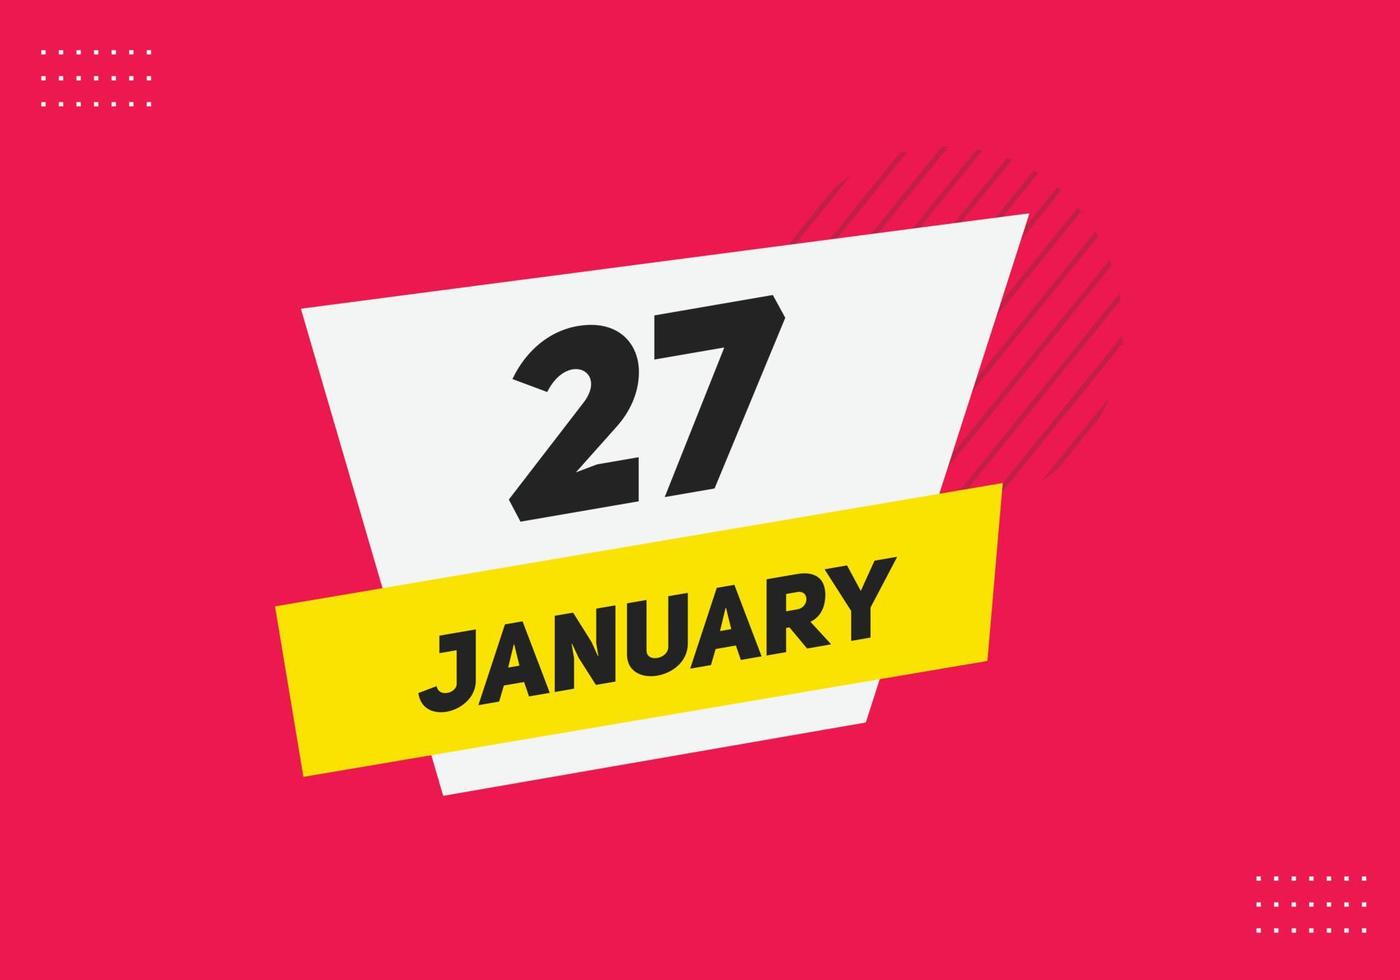 january 27 calendar reminder. 27th january daily calendar icon template. Calendar 27th january icon Design template. Vector illustration